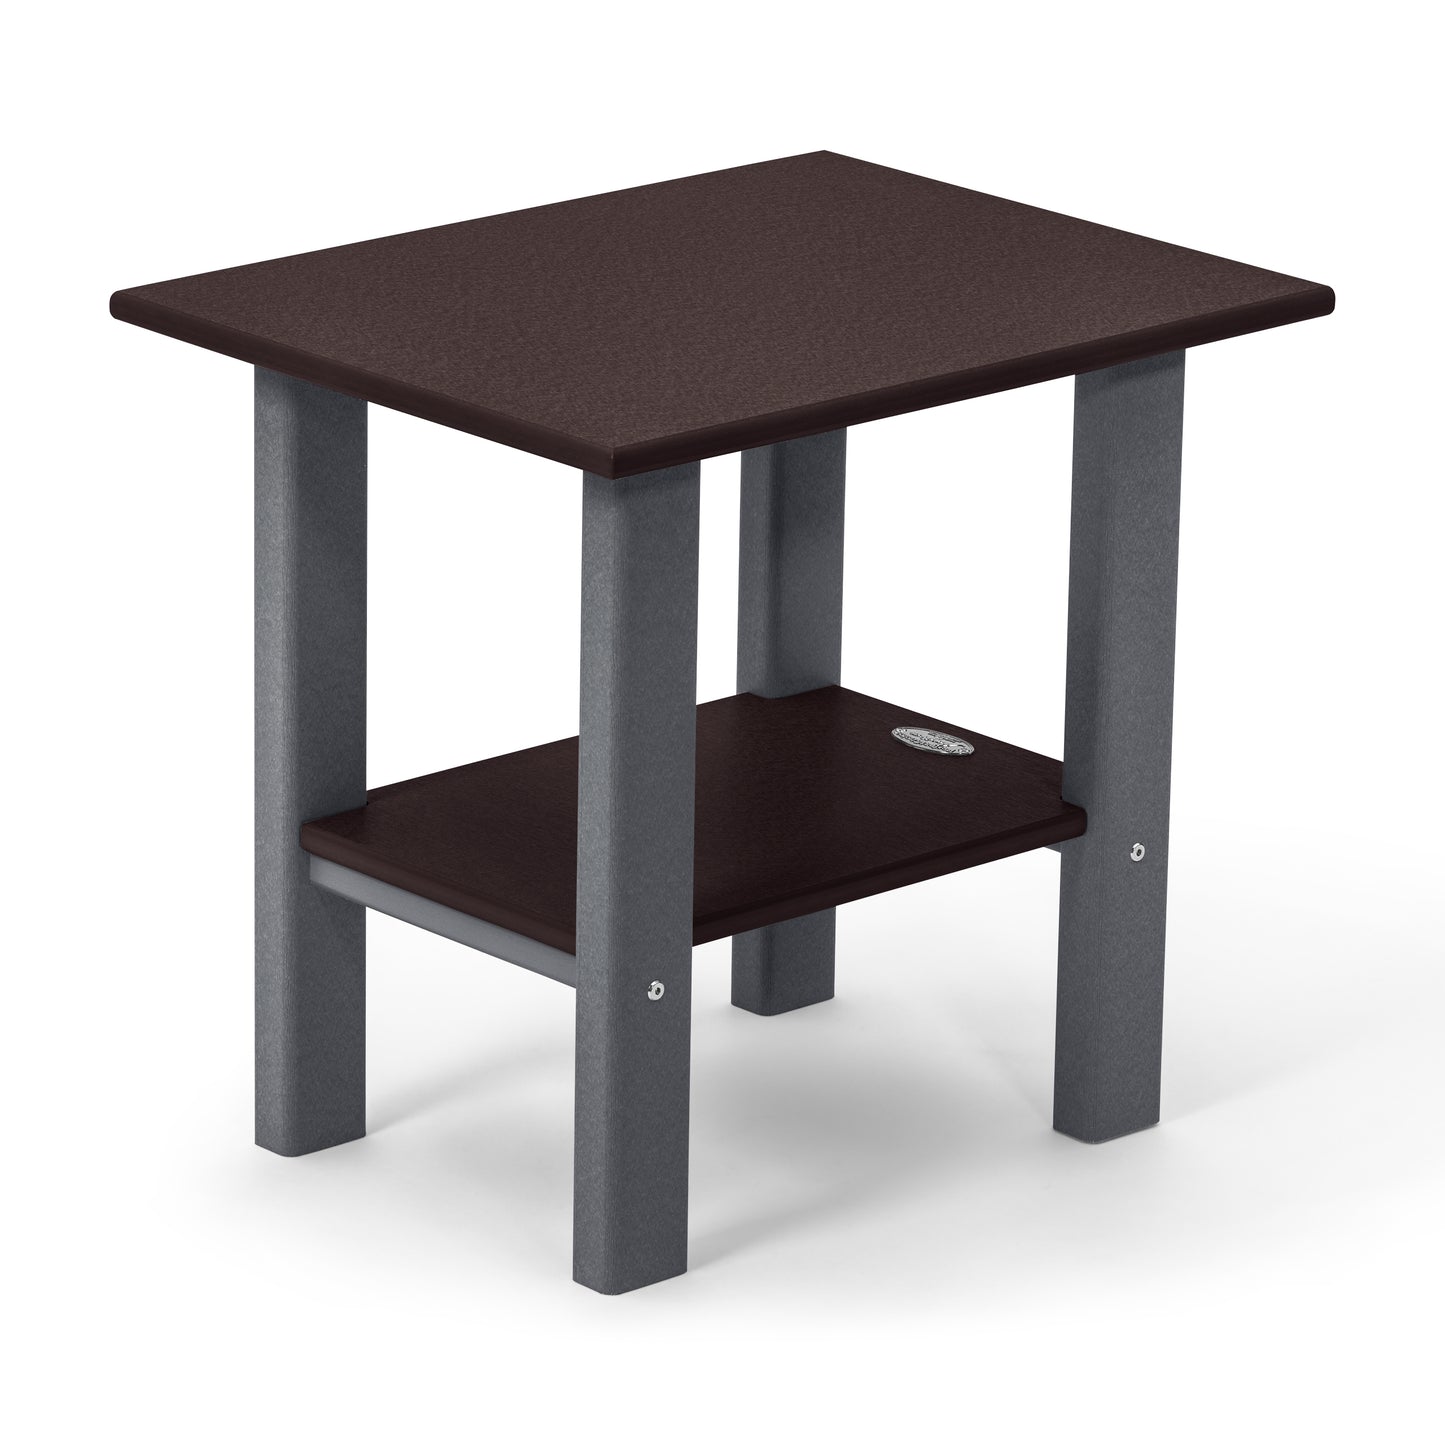 Perfect Choice Furniture Recycled Plastic Stanton Side Table - LEAD TIME TO SHIP 4 WEEKS OR LESS